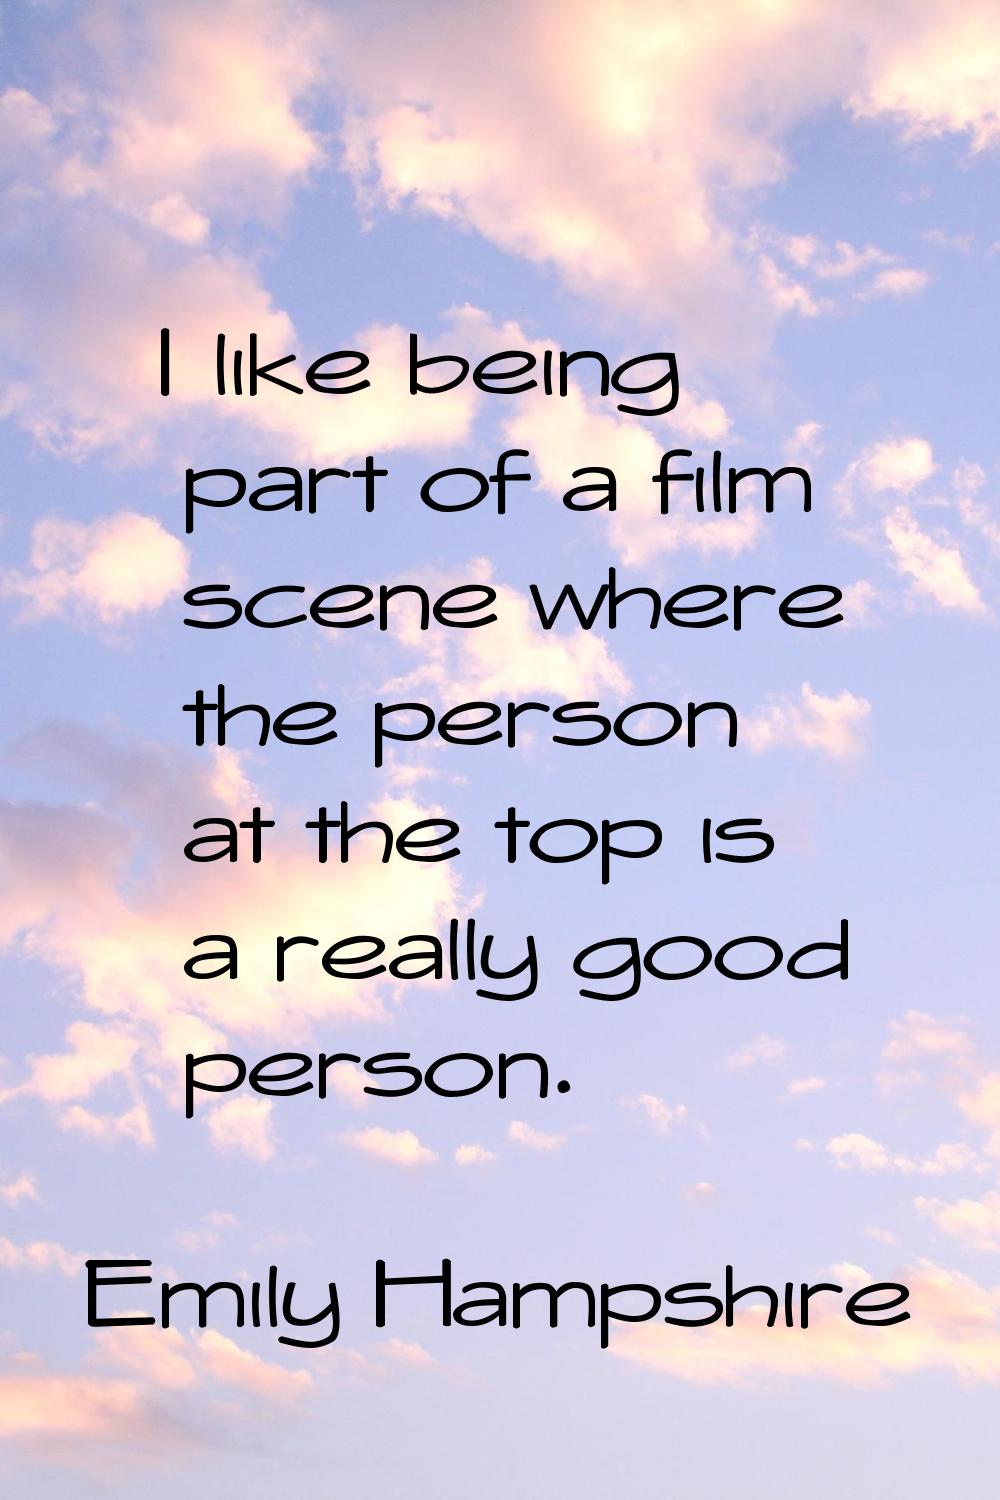 I like being part of a film scene where the person at the top is a really good person.